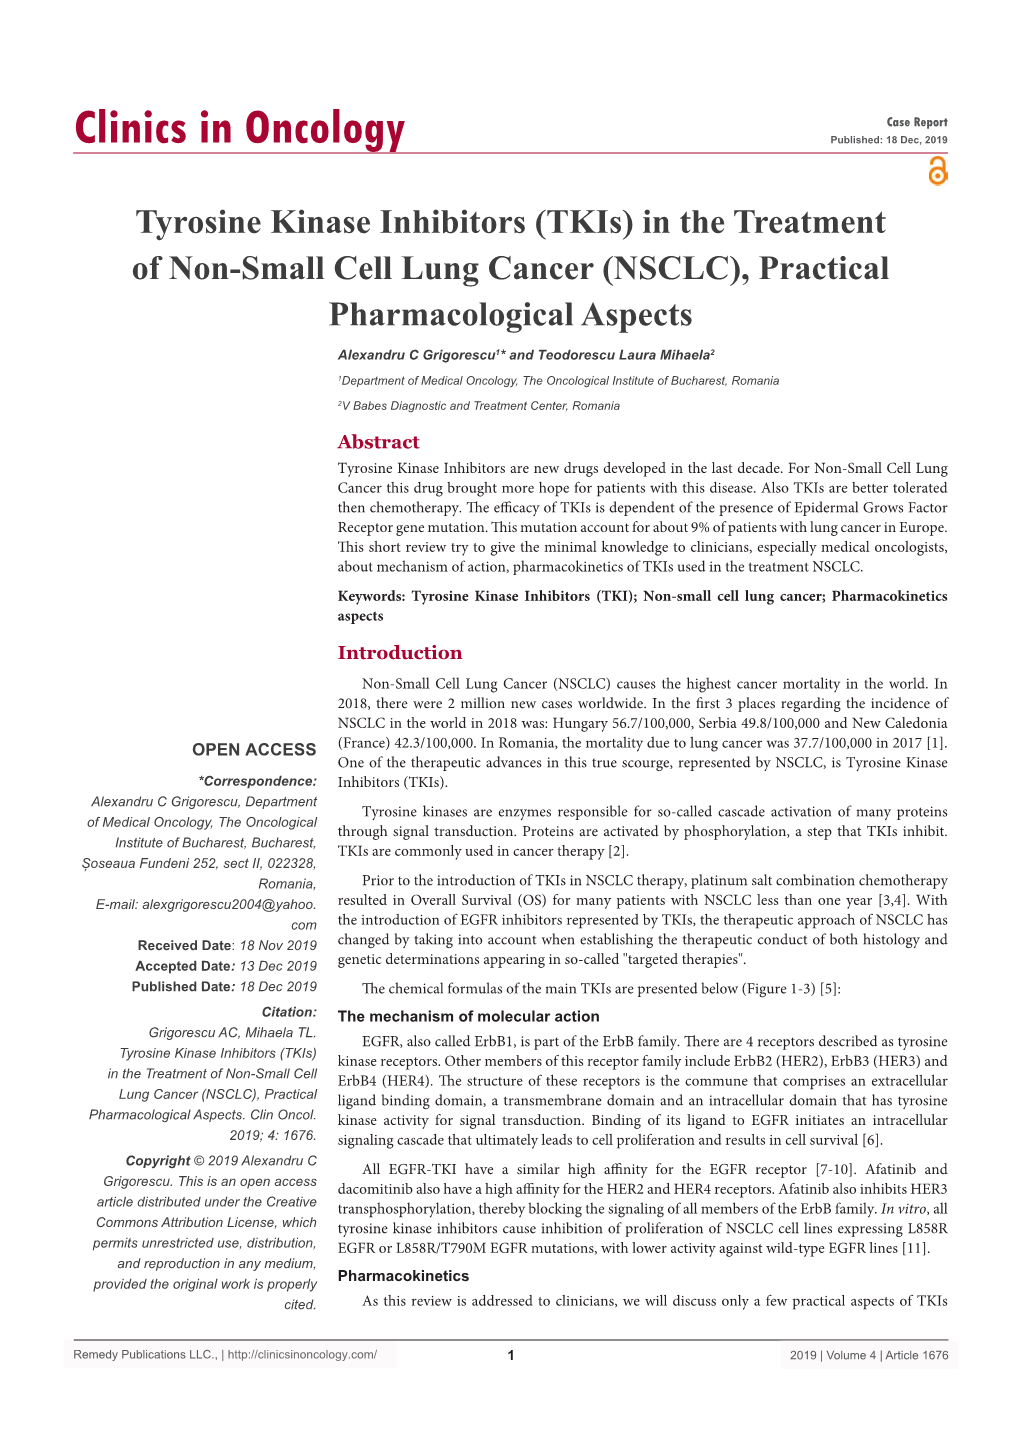 Tyrosine Kinase Inhibitors (Tkis) in the Treatment of Non-Small Cell Lung Cancer (NSCLC), Practical Pharmacological Aspects